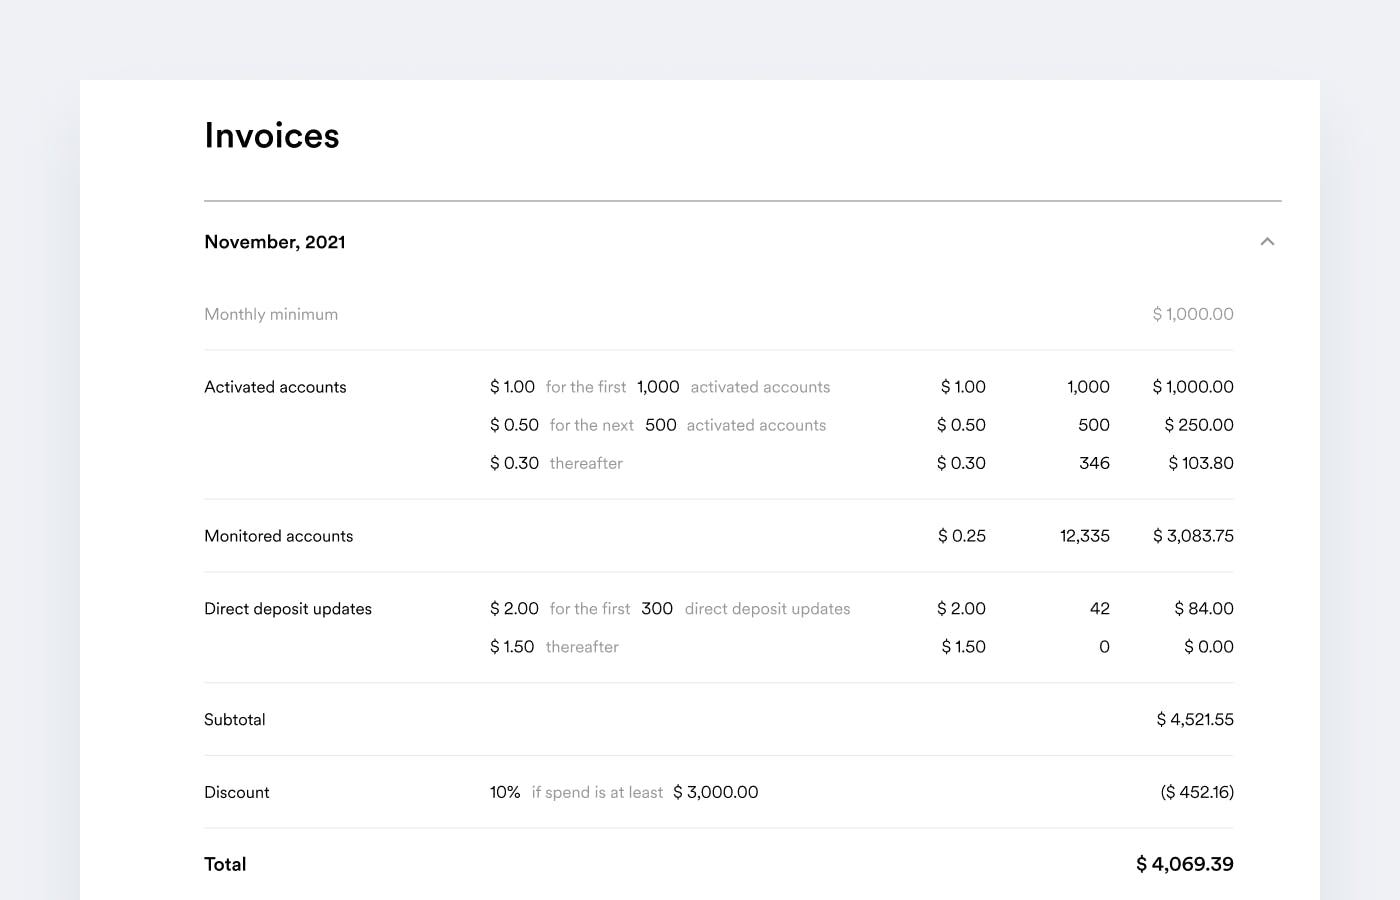 Invoices page